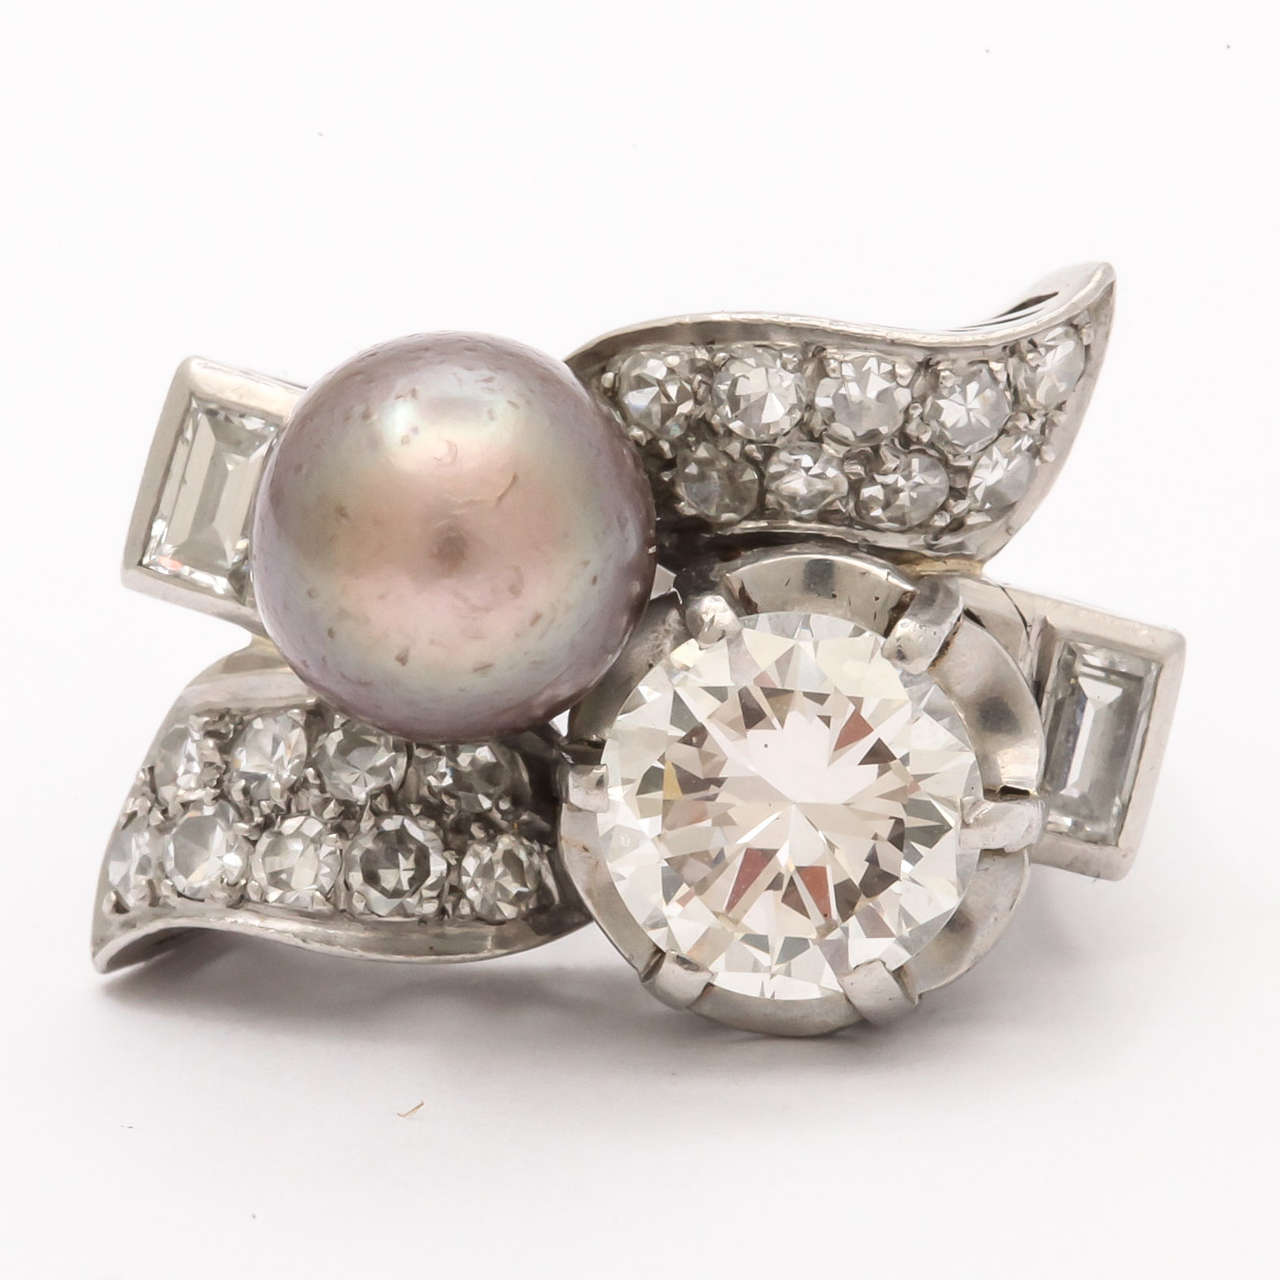 A stunning Retro cocktail ring with a center two carrot diamond and a rare brown natural pearl (8.5mm) wonderfully mounted on an artistic platinum mount with two diamond leaves. GIA certified. With two baguette diamonds flanking the arrangement.